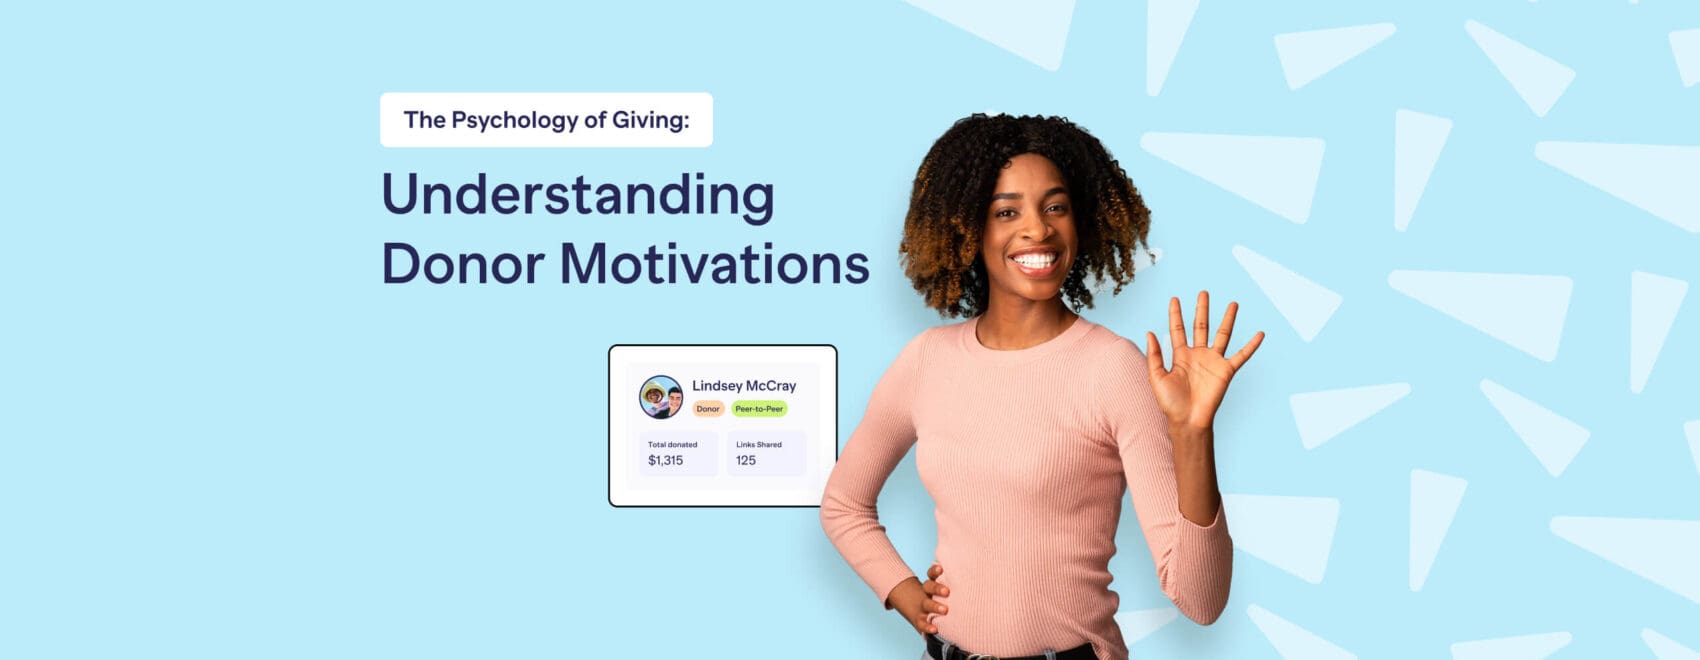 The Psychology of Giving Understanding Donor Motivations